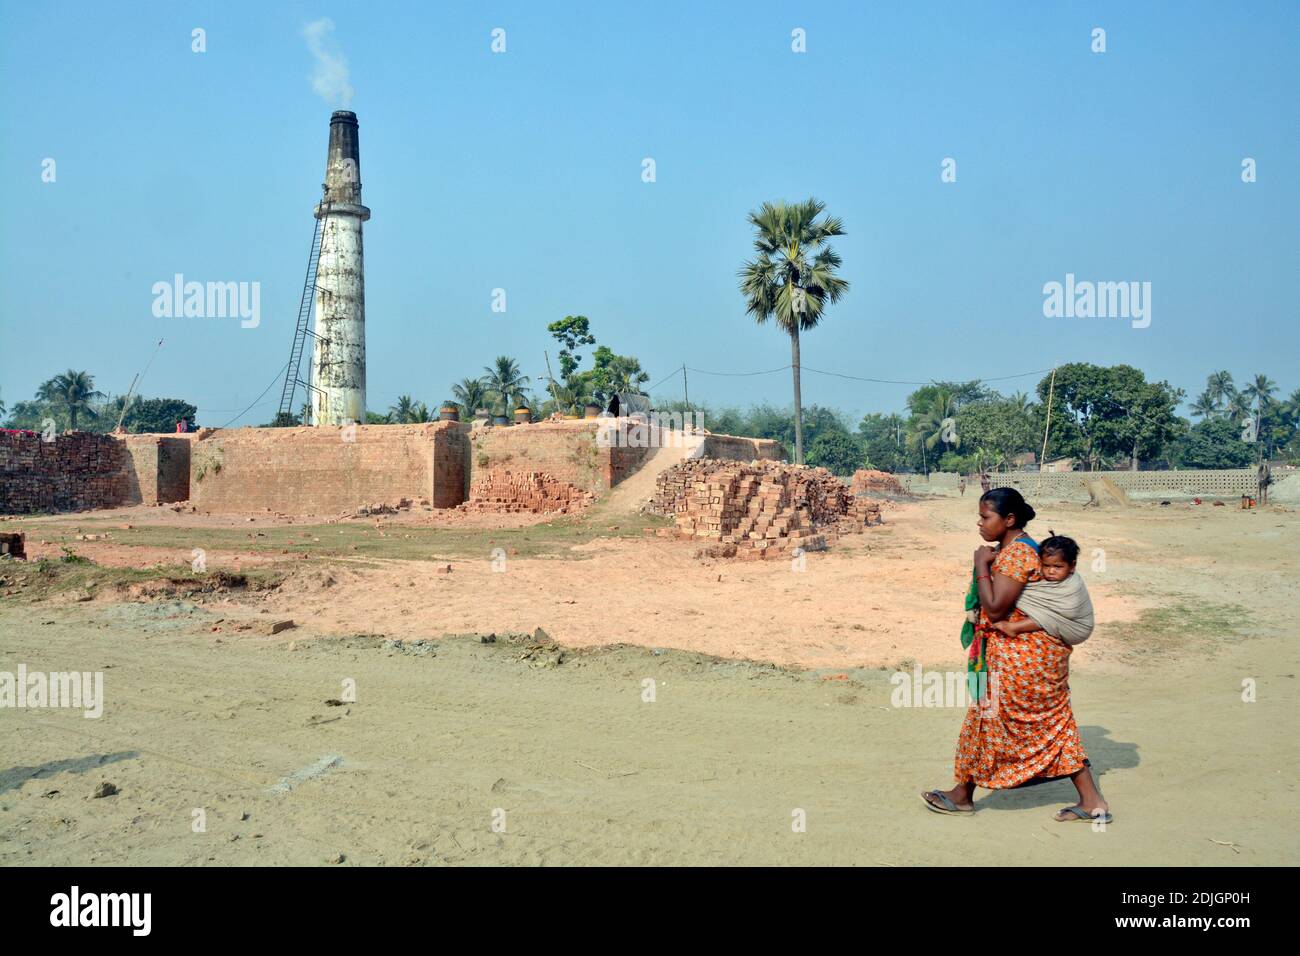 Picture of a brick kiln in rural West Bengal.The mother wraps the baby in a towel on her back and returns to her home after work. Stock Photo